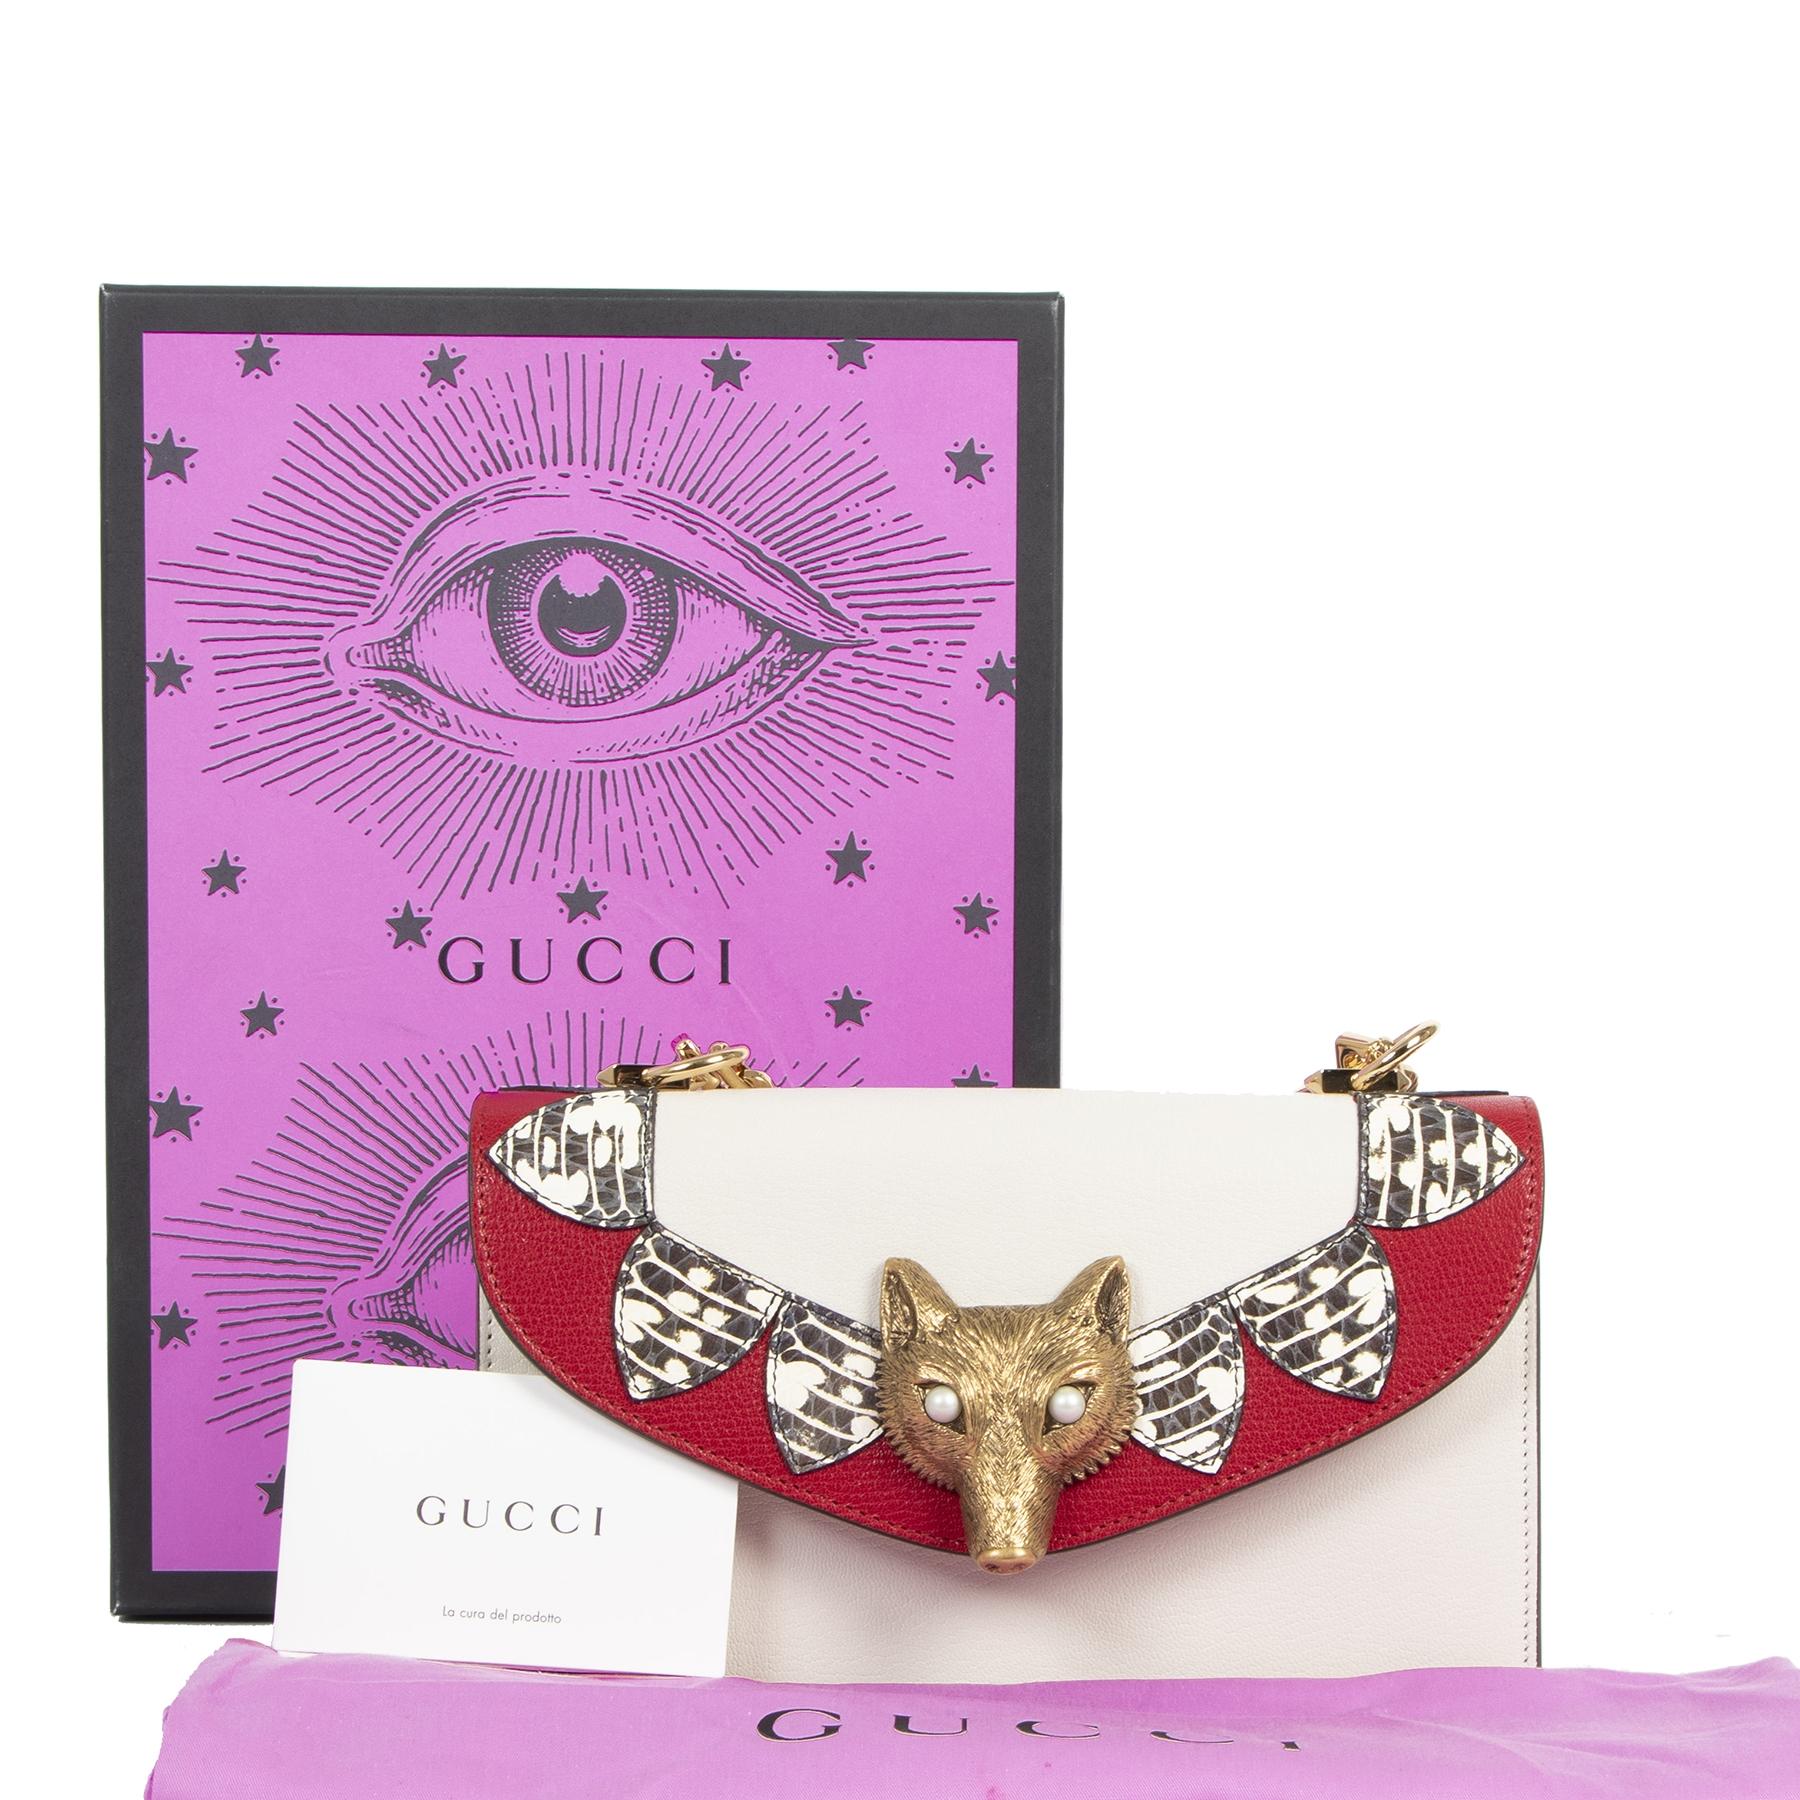 As New

Gucci Limited Python Fox Broche Bag

We introduce you the Gucci Broche Bag form the 